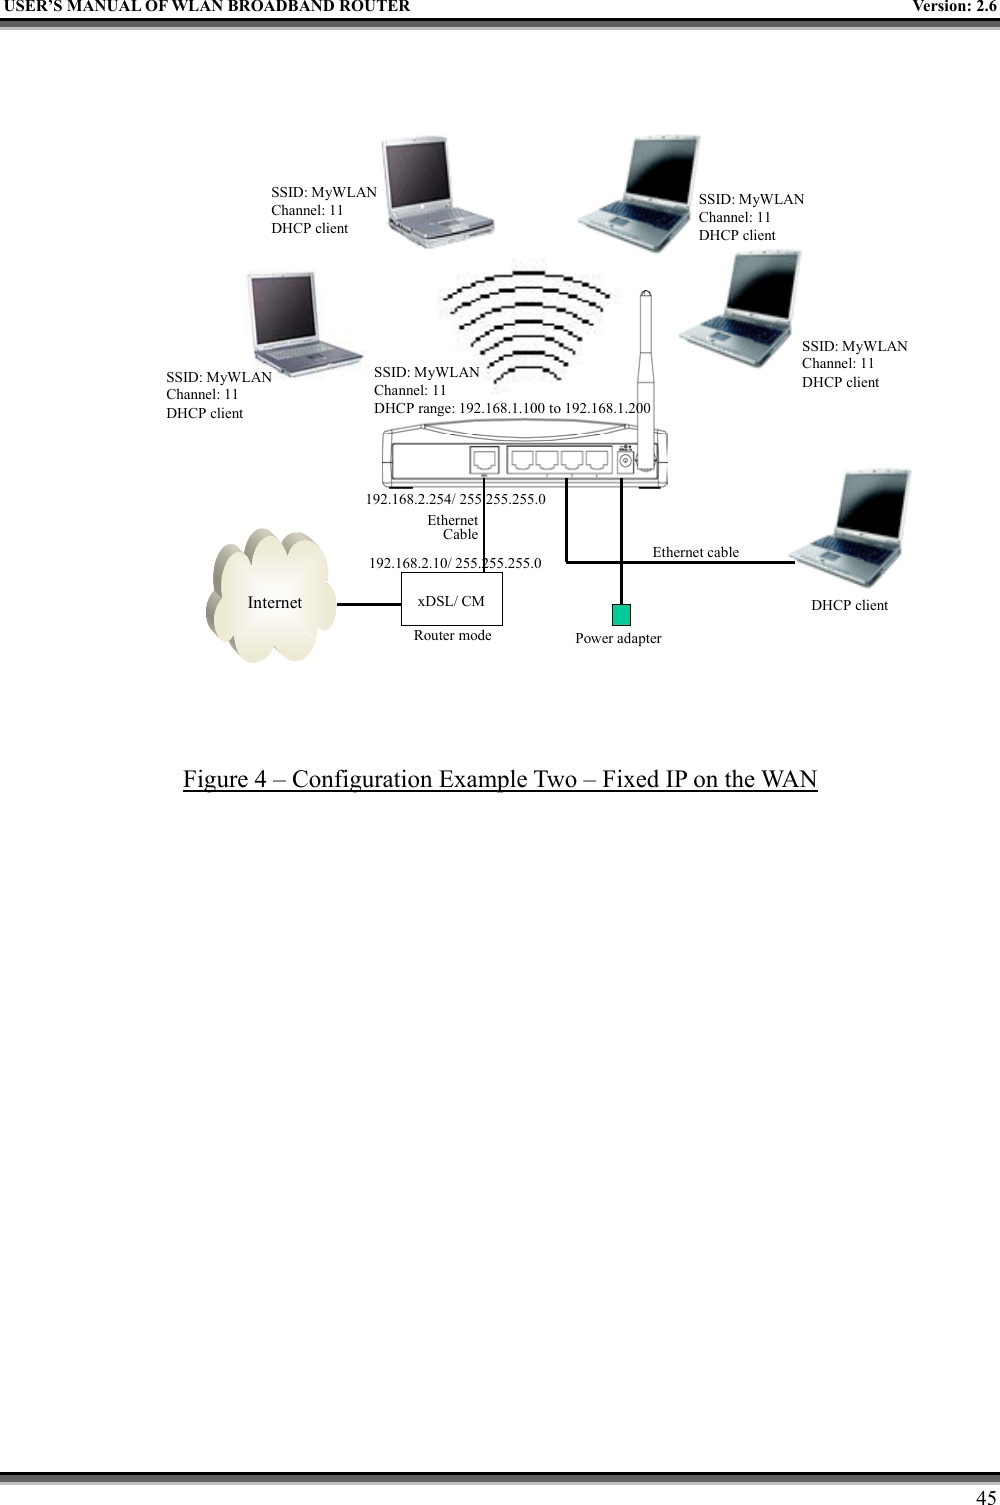   USER’S MANUAL OF WLAN BROADBAND ROUTER    Version: 2.6     45 Internet xDSL/ CMPower adapterEthernetCableEthernet cableSSID: MyWLANChannel: 11 DHCP clientSSID: MyWLANChannel: 11 DHCP clientSSID: MyWLANChannel: 11 DHCP clientSSID: MyWLANChannel: 11 DHCP clientDHCP clientRouter modeSSID: MyWLANChannel: 11DHCP range: 192.168.1.100 to 192.168.1.200192.168.2.10/ 255.255.255.0192.168.2.254/ 255.255.255.0 Figure 4 – Configuration Example Two – Fixed IP on the WAN  